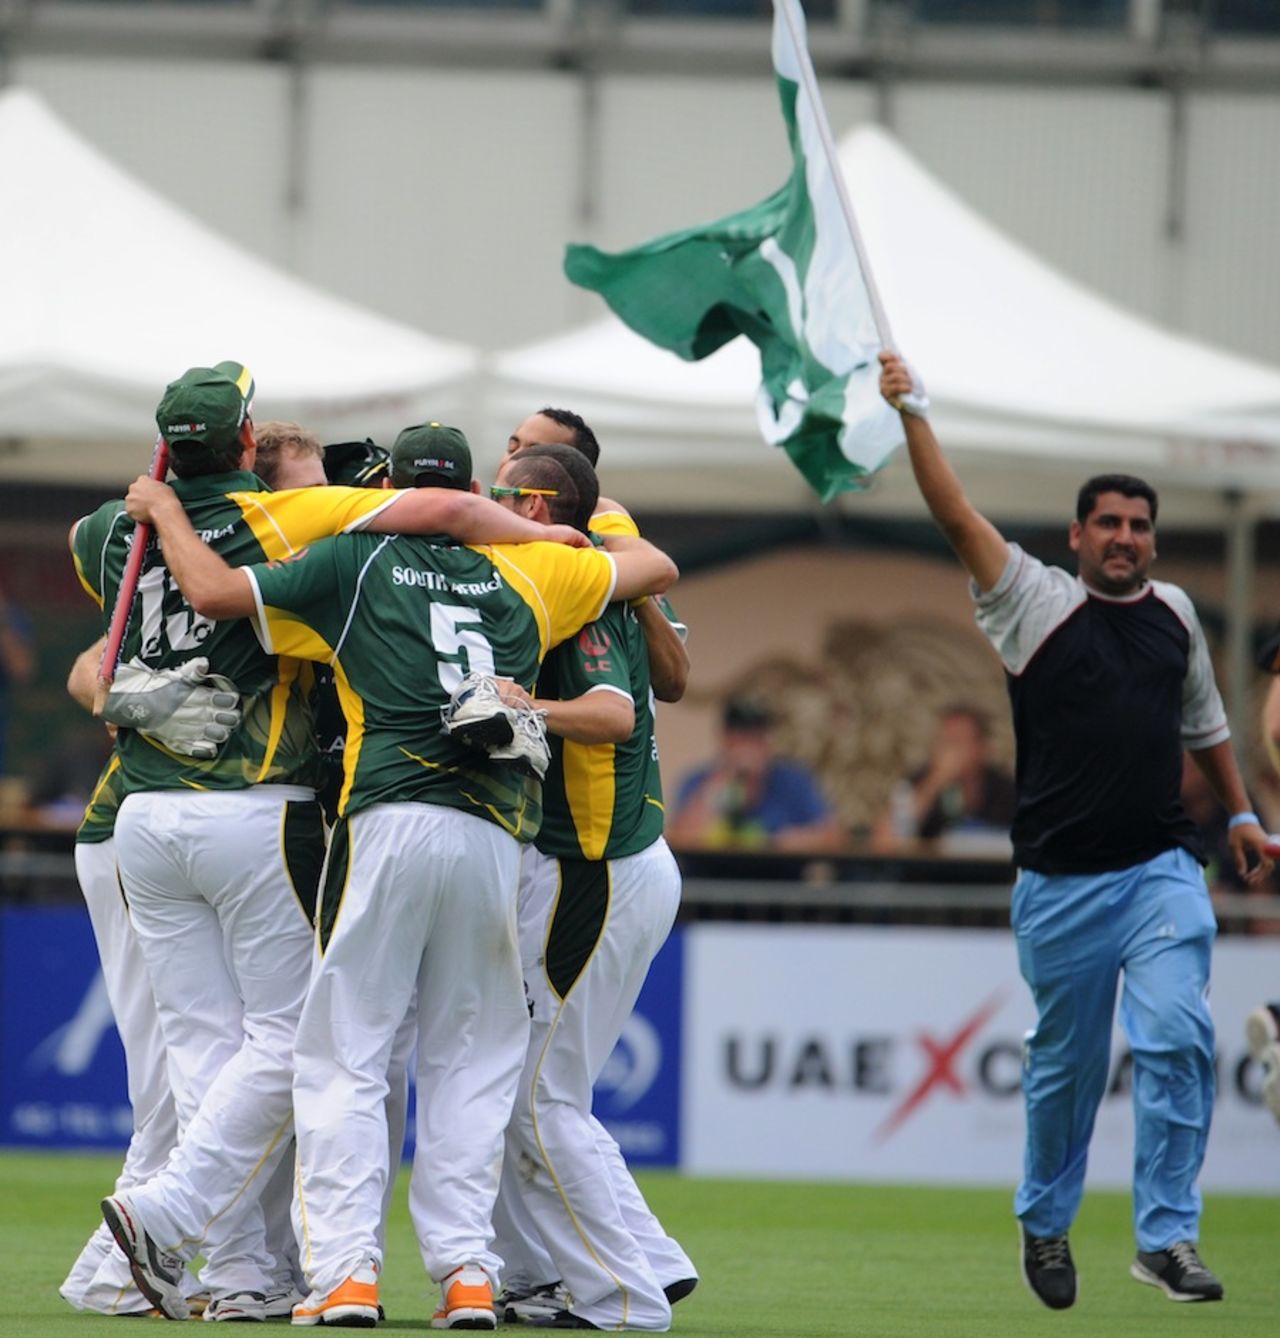 South Africa celebrate their win in the final of Hong Kong Super Sixes over Pakistan, Hong Kong, October 28, 2012